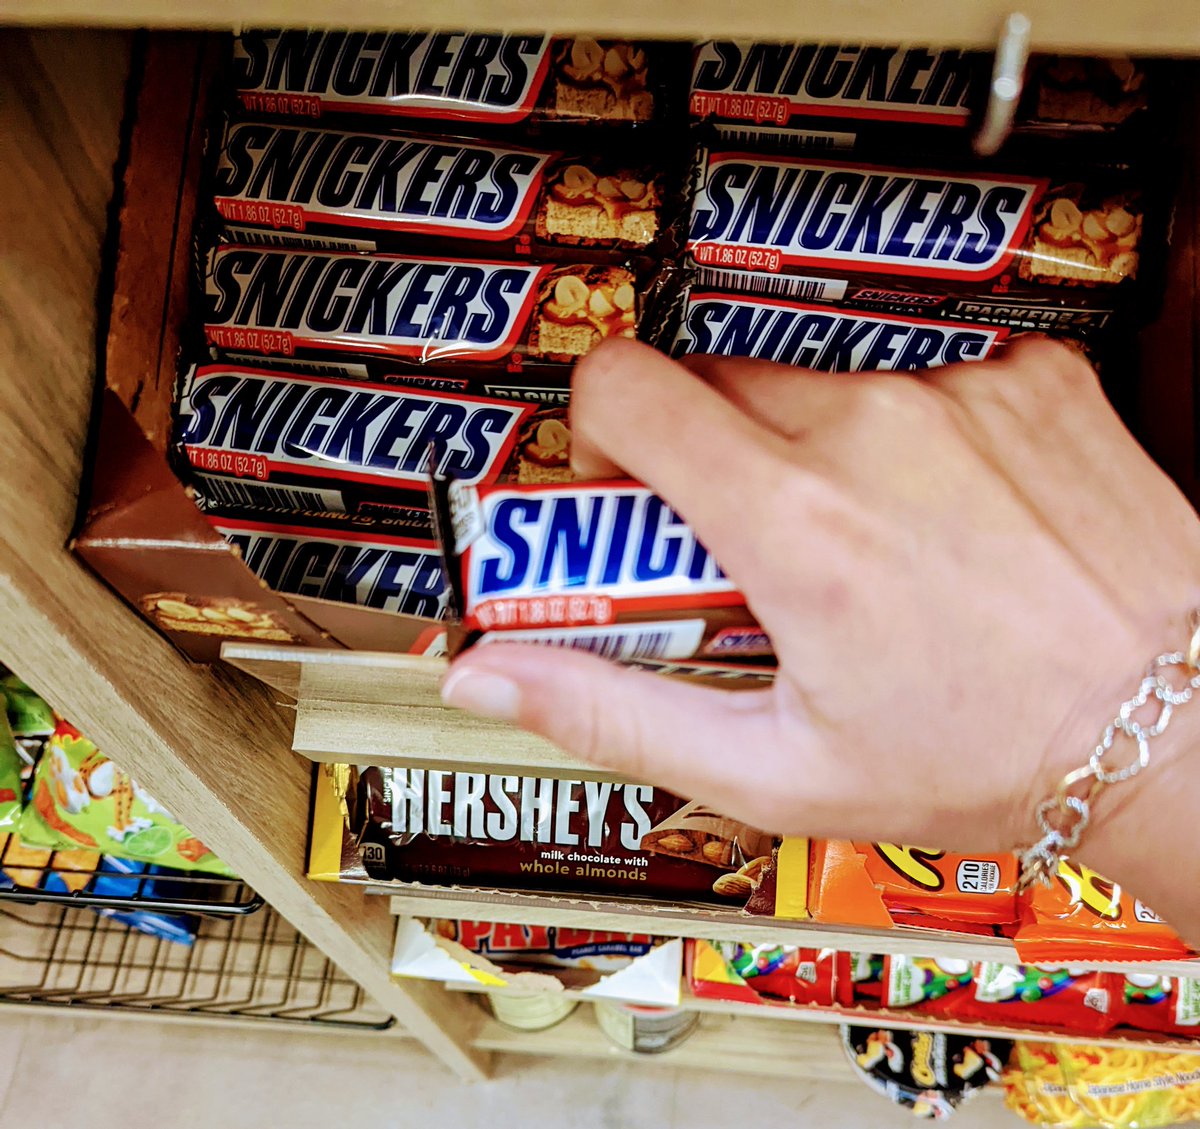 Lord I need a Snickers, your fav too? @JimmyReyesArt